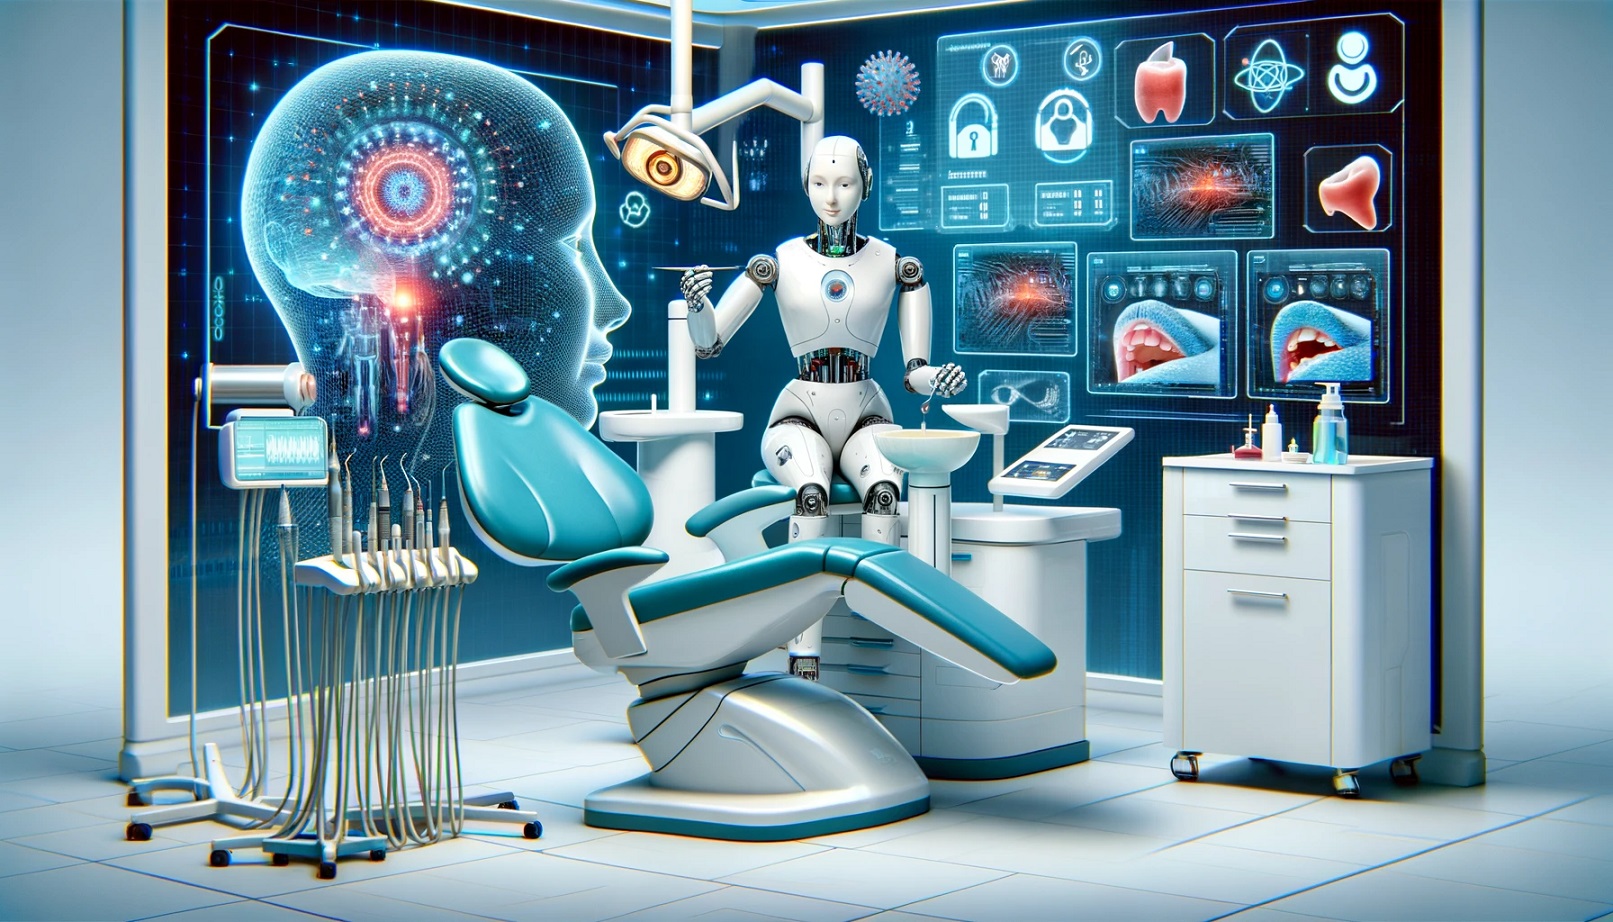 The image should visually represent the integration of AI in dental practice